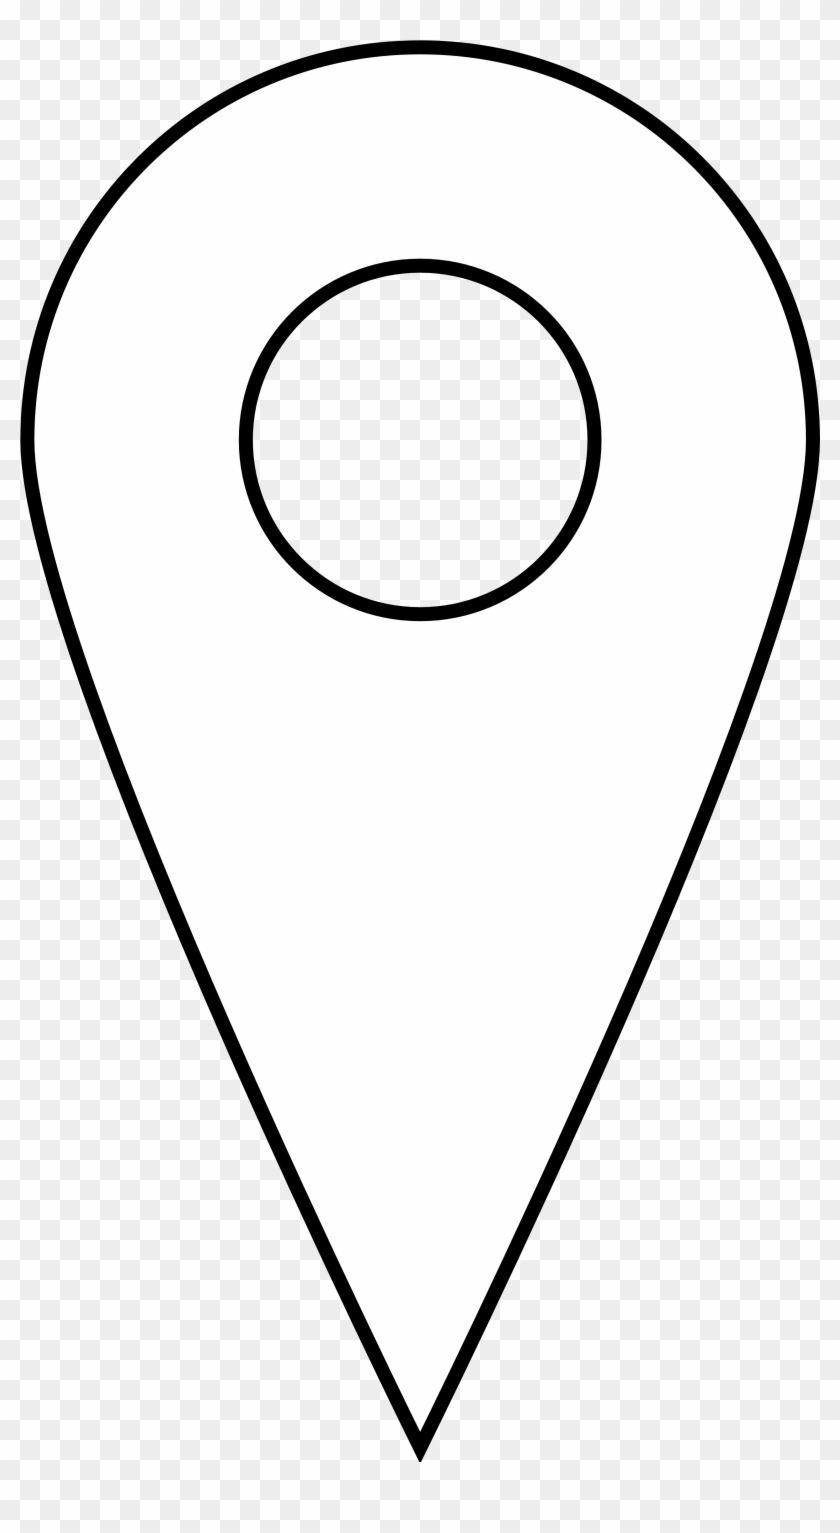 Location Clip Art With Images Medium Size - Map Pin Icon White Png #289160